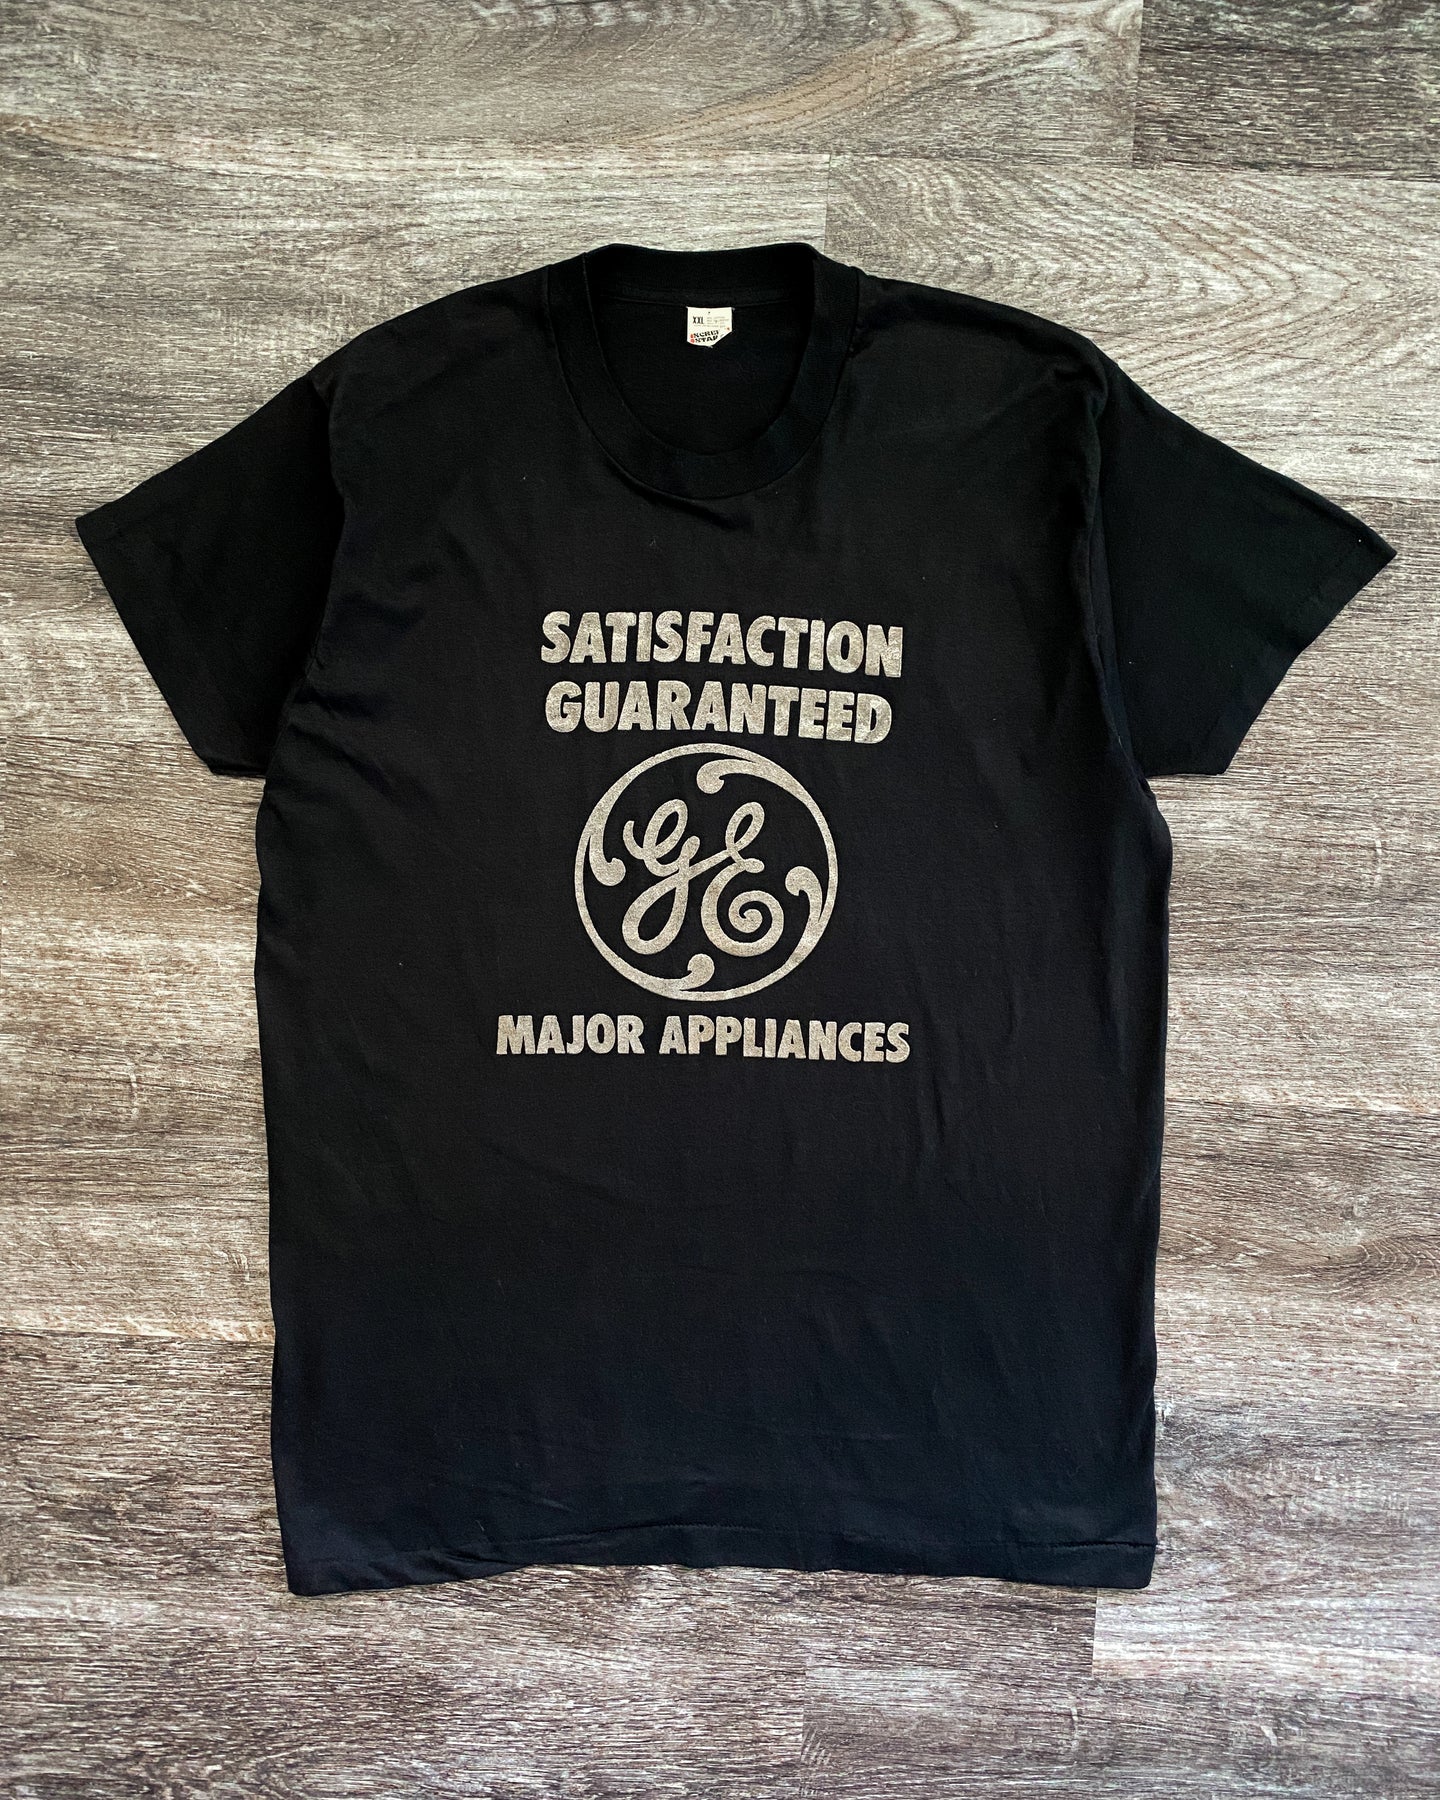 1980s General Electric Single Stitch Black Tee - Size X-Large